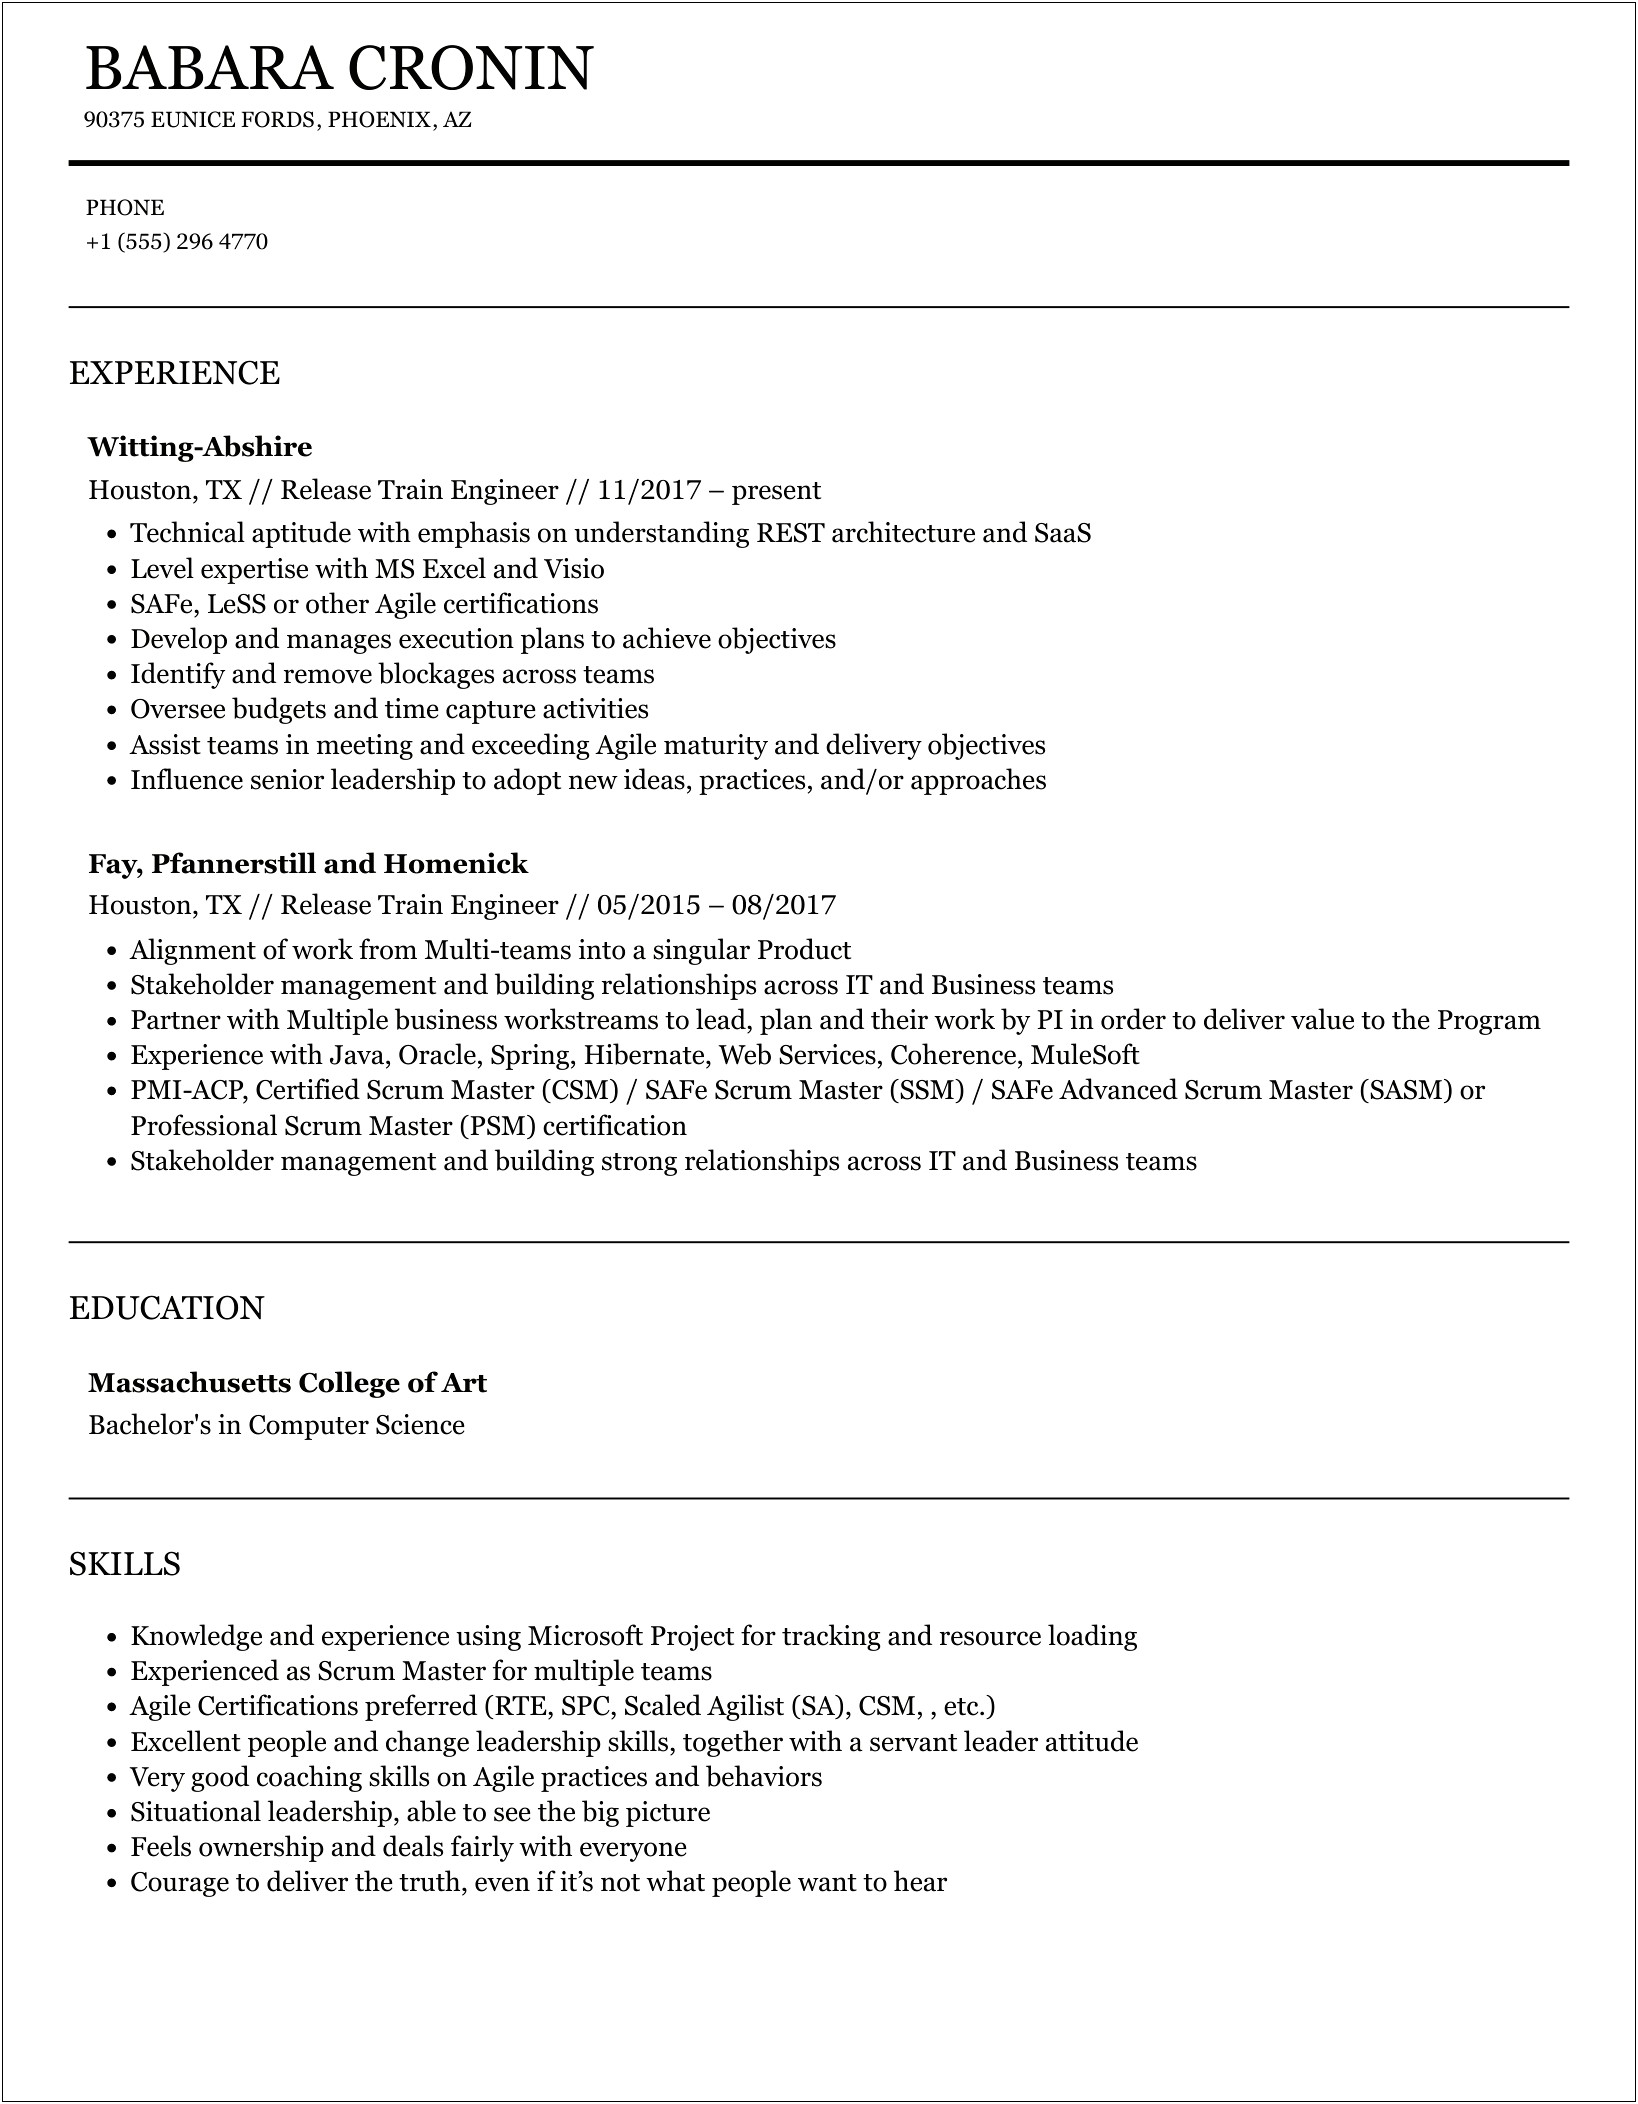 Sample Resume Objective Statement For Release Train Engineer